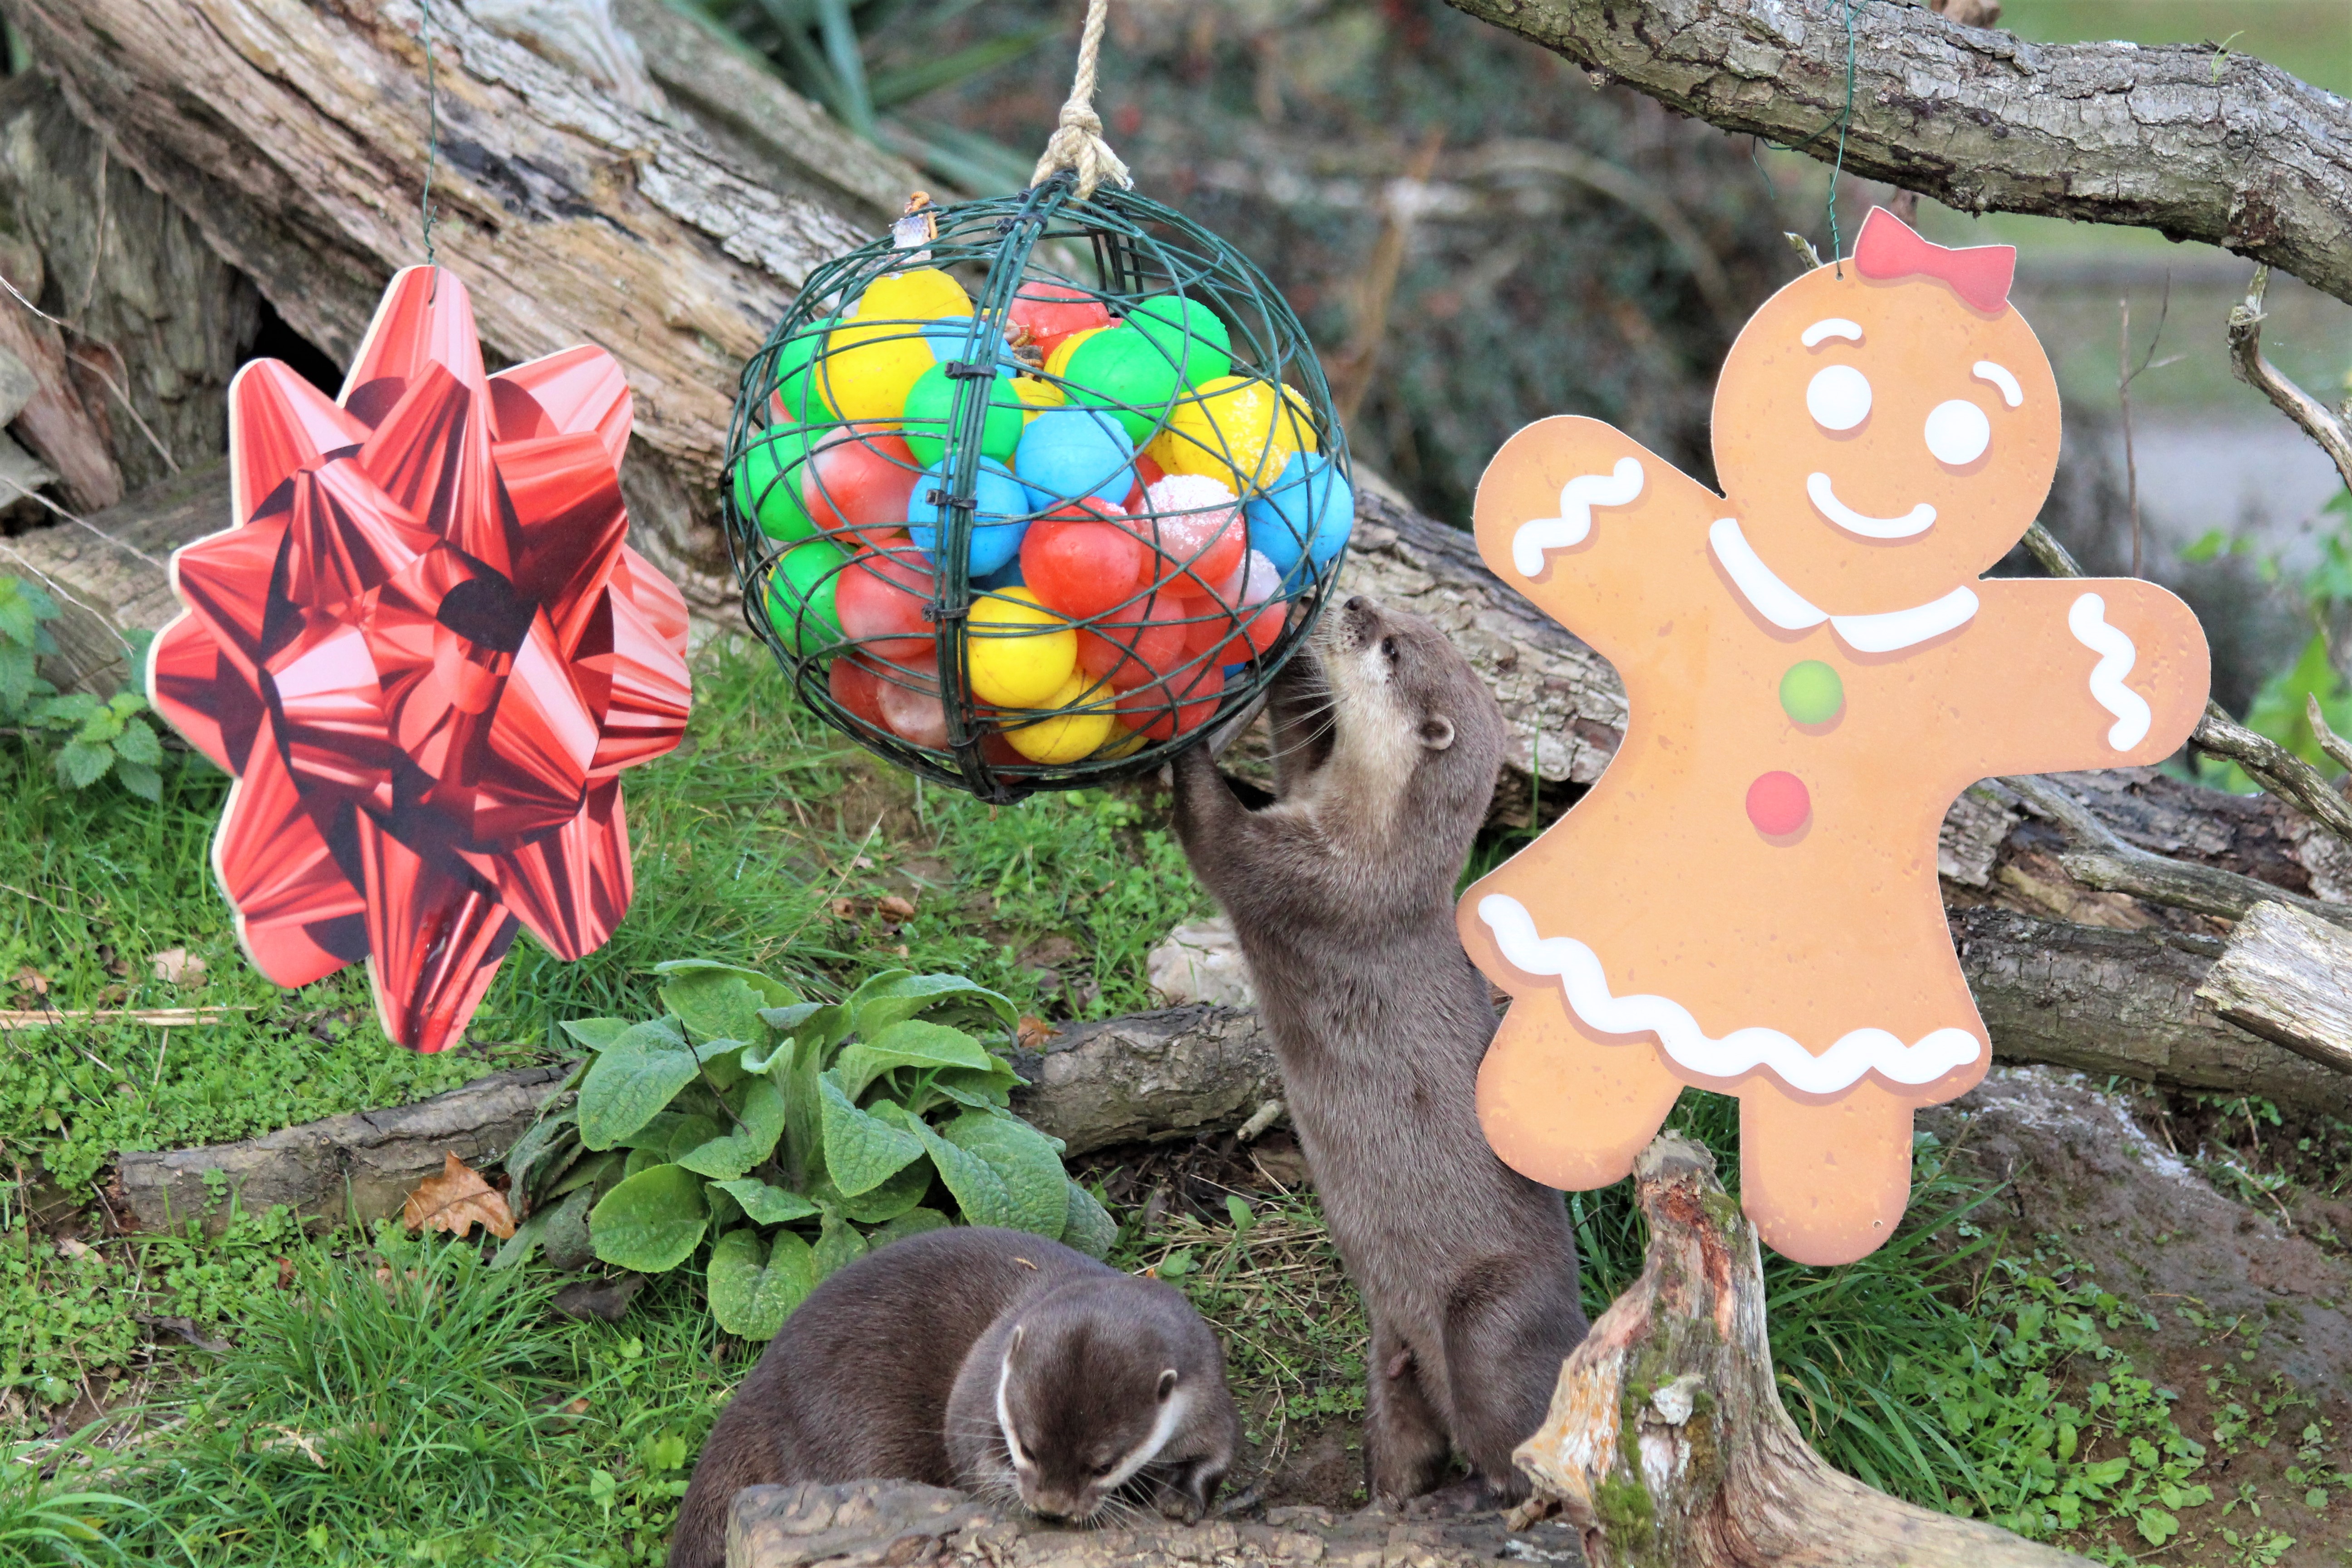 Otter plays with Christmas decorations